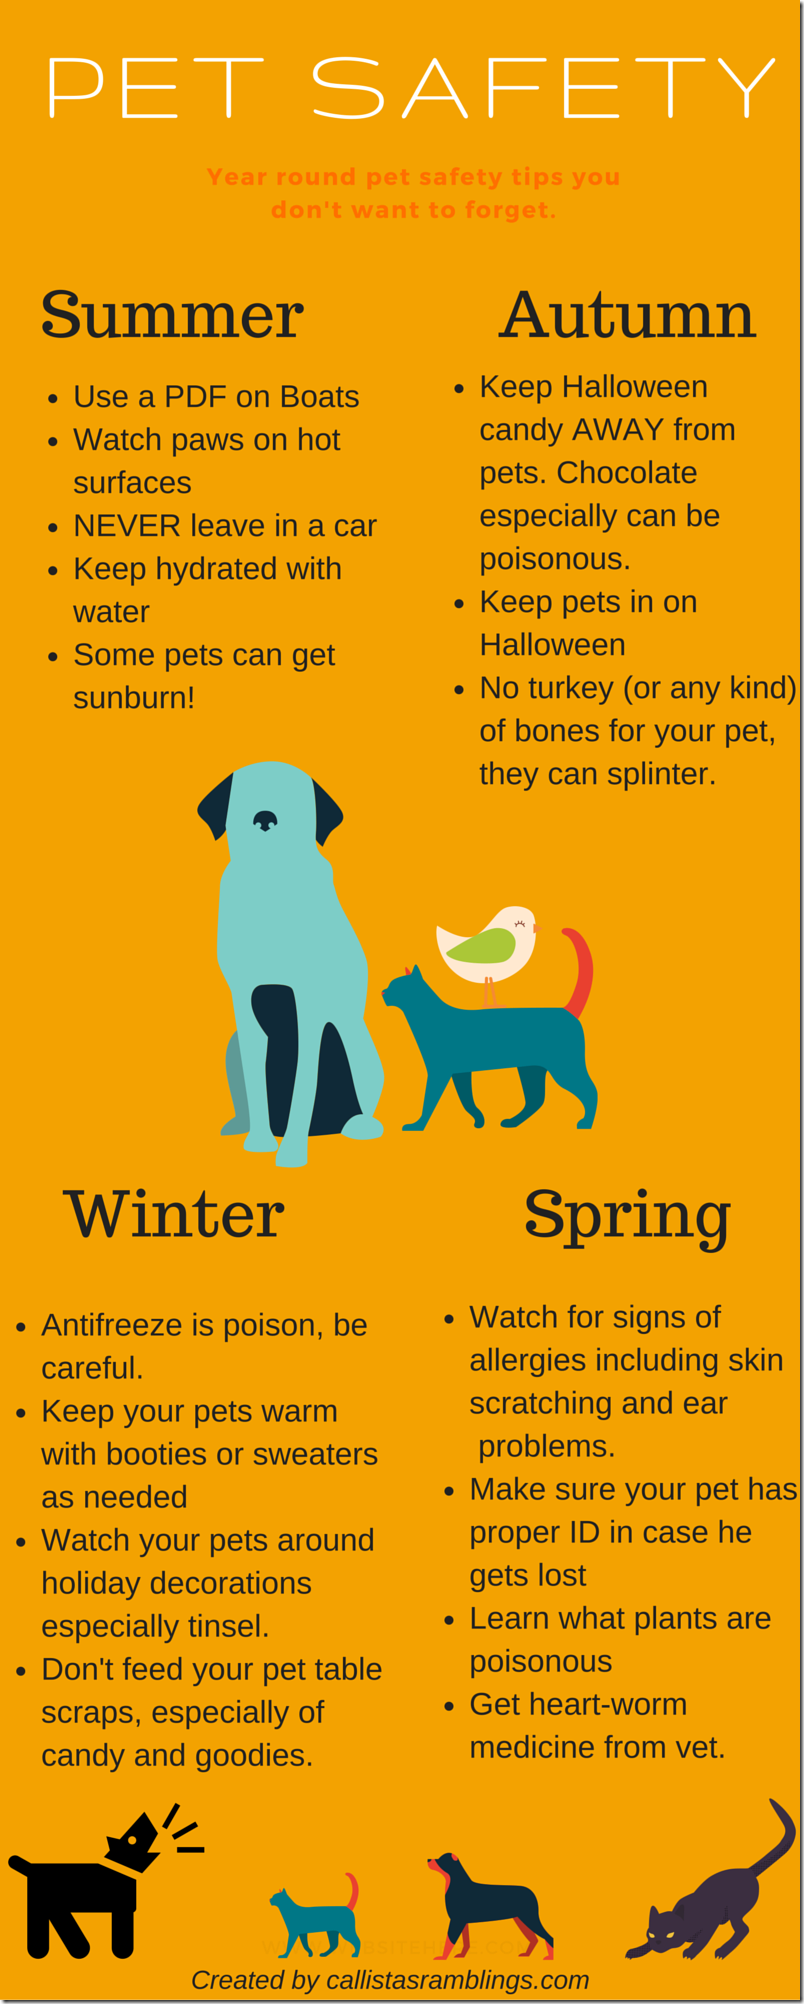 https://www.urbanpethospital.com/blog/image.axd?picture=/pet-safety-infographic.png